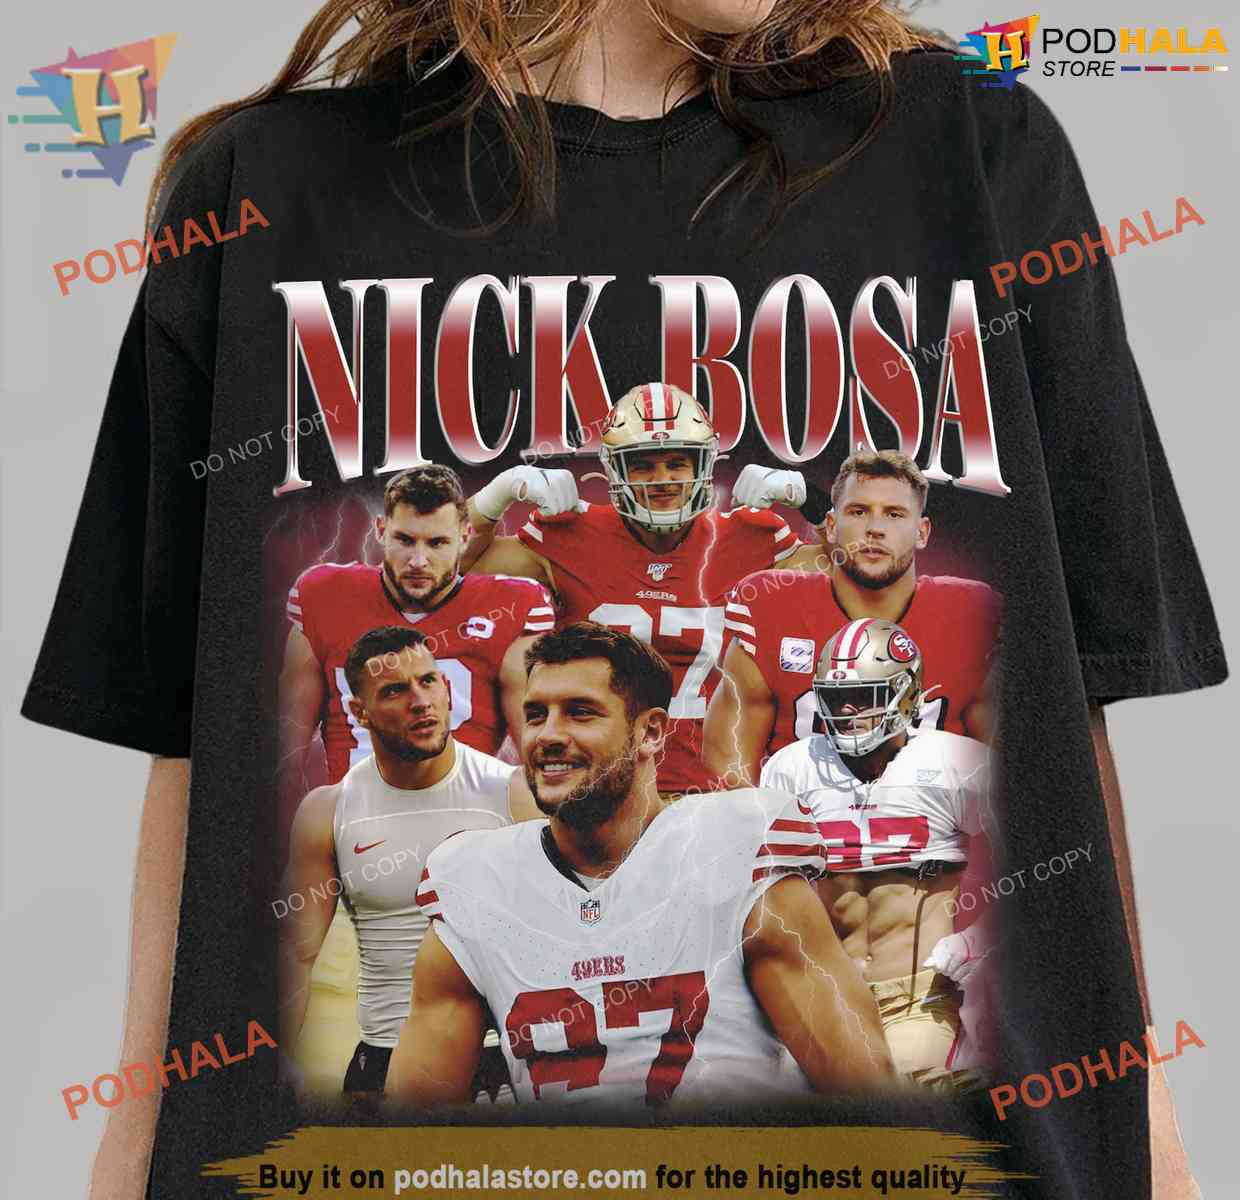 Vintage Bootleg Nick Bosa Shirt, Nick Bosa Classic 90s Graphic Tee For 49ers Fans